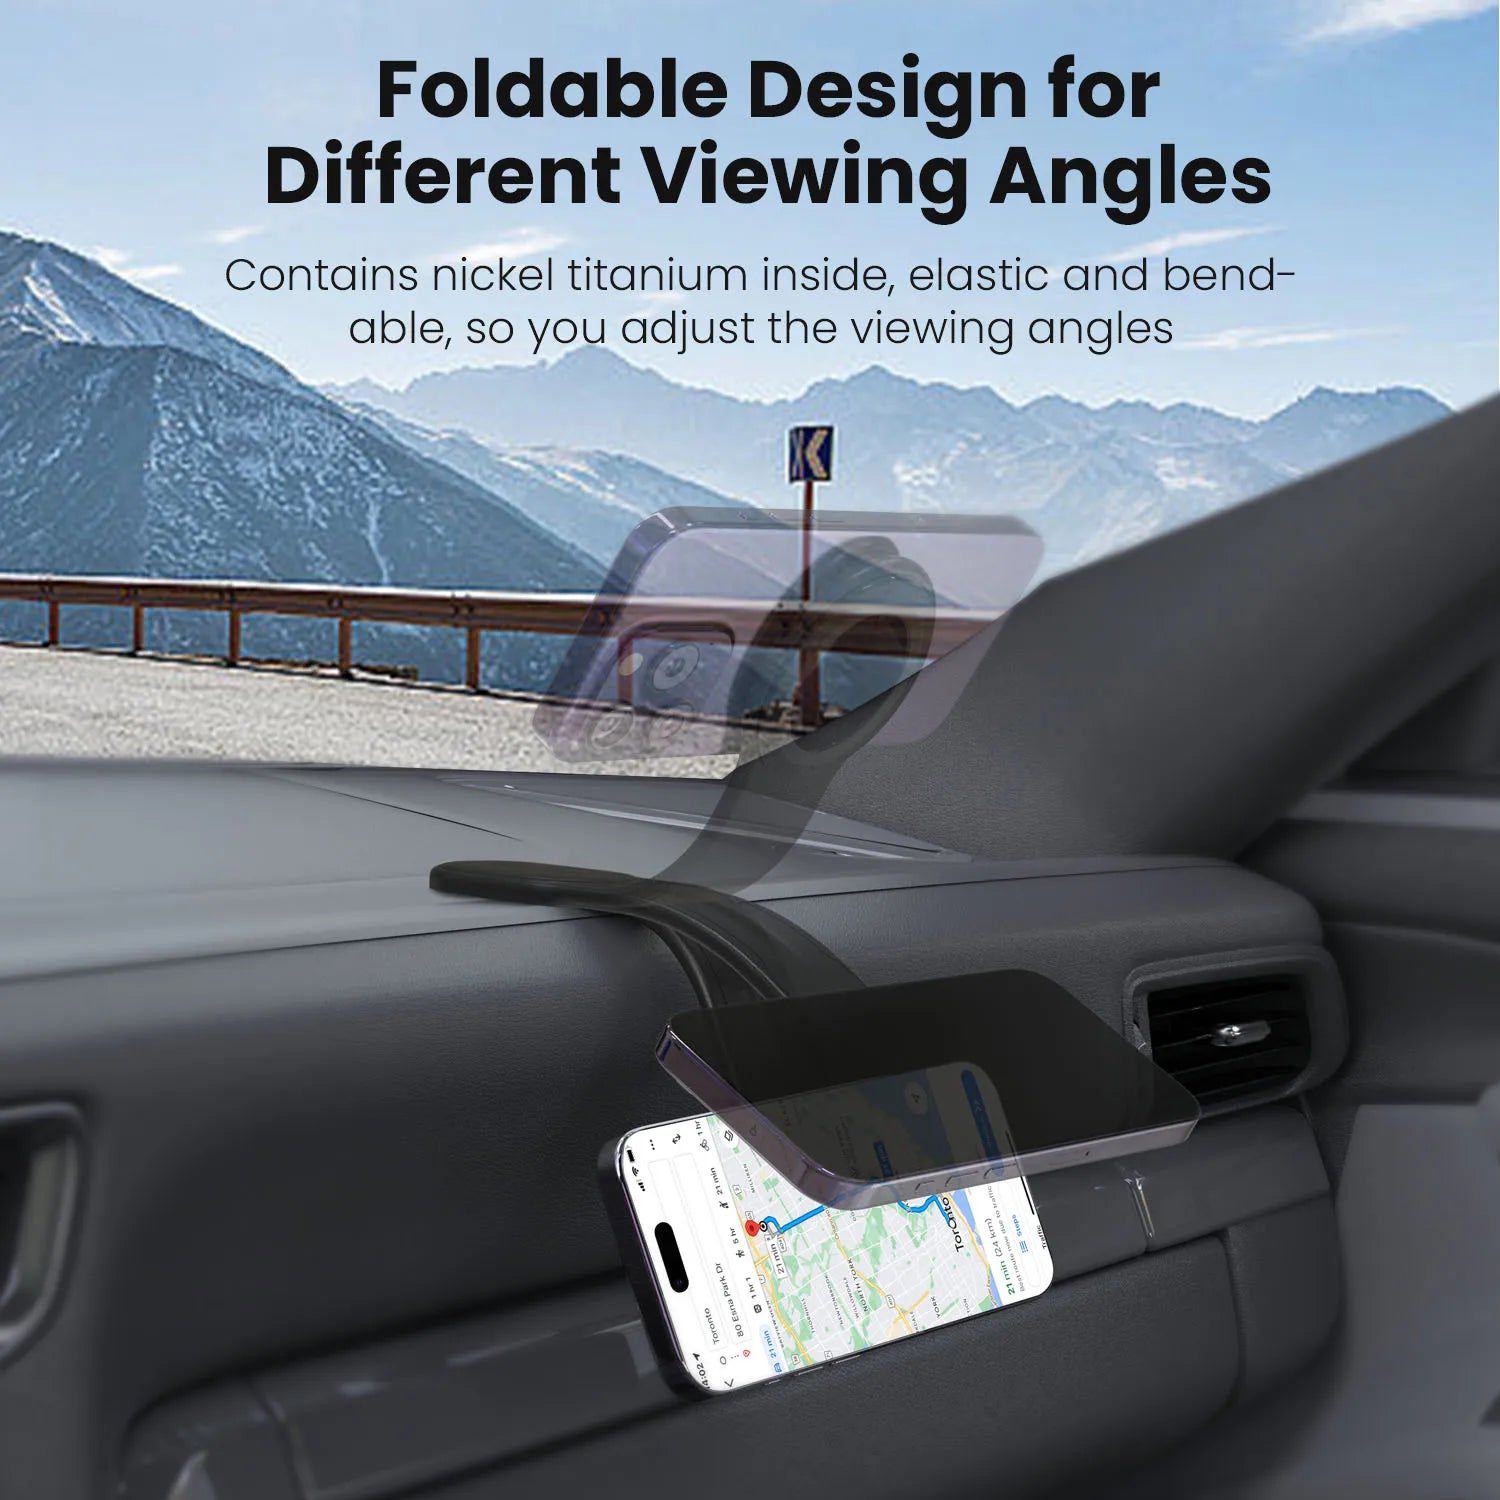 foldable design of Moxedo Magnetic Car Mount Phone Holder to view in any angle